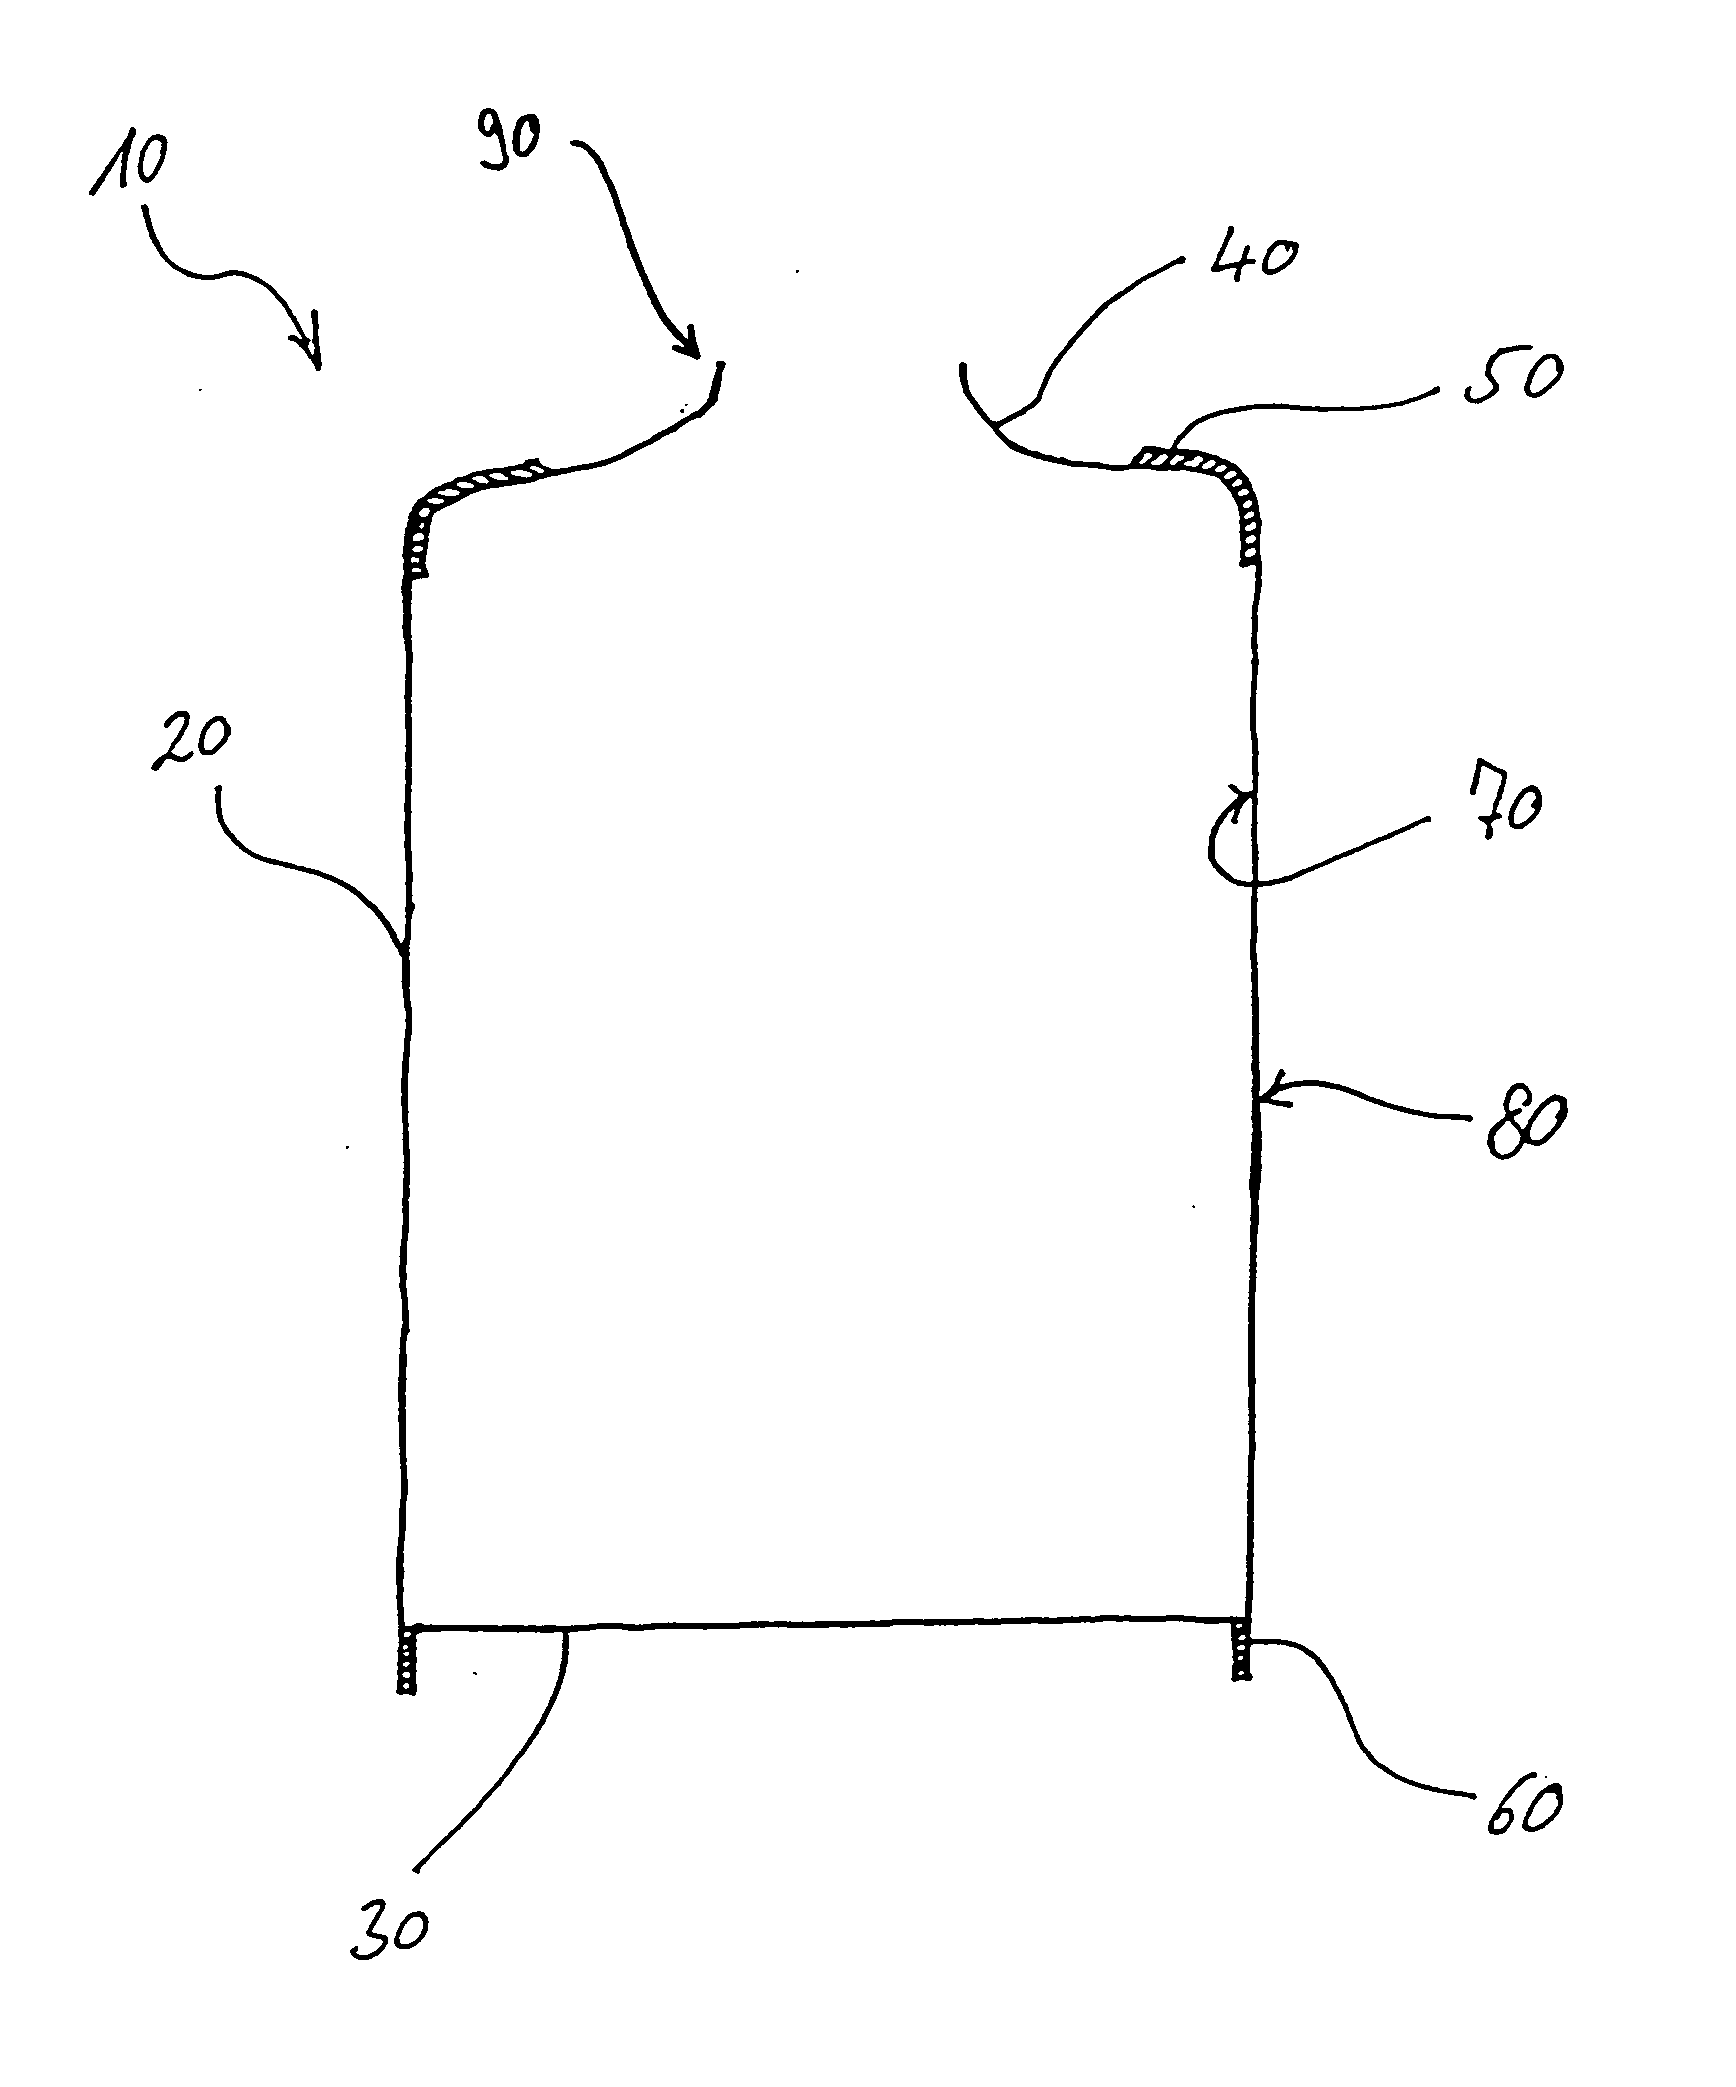 Tubular, especially can-shaped, receptacle for the accommodation of fluids, a method of manufacture, and use